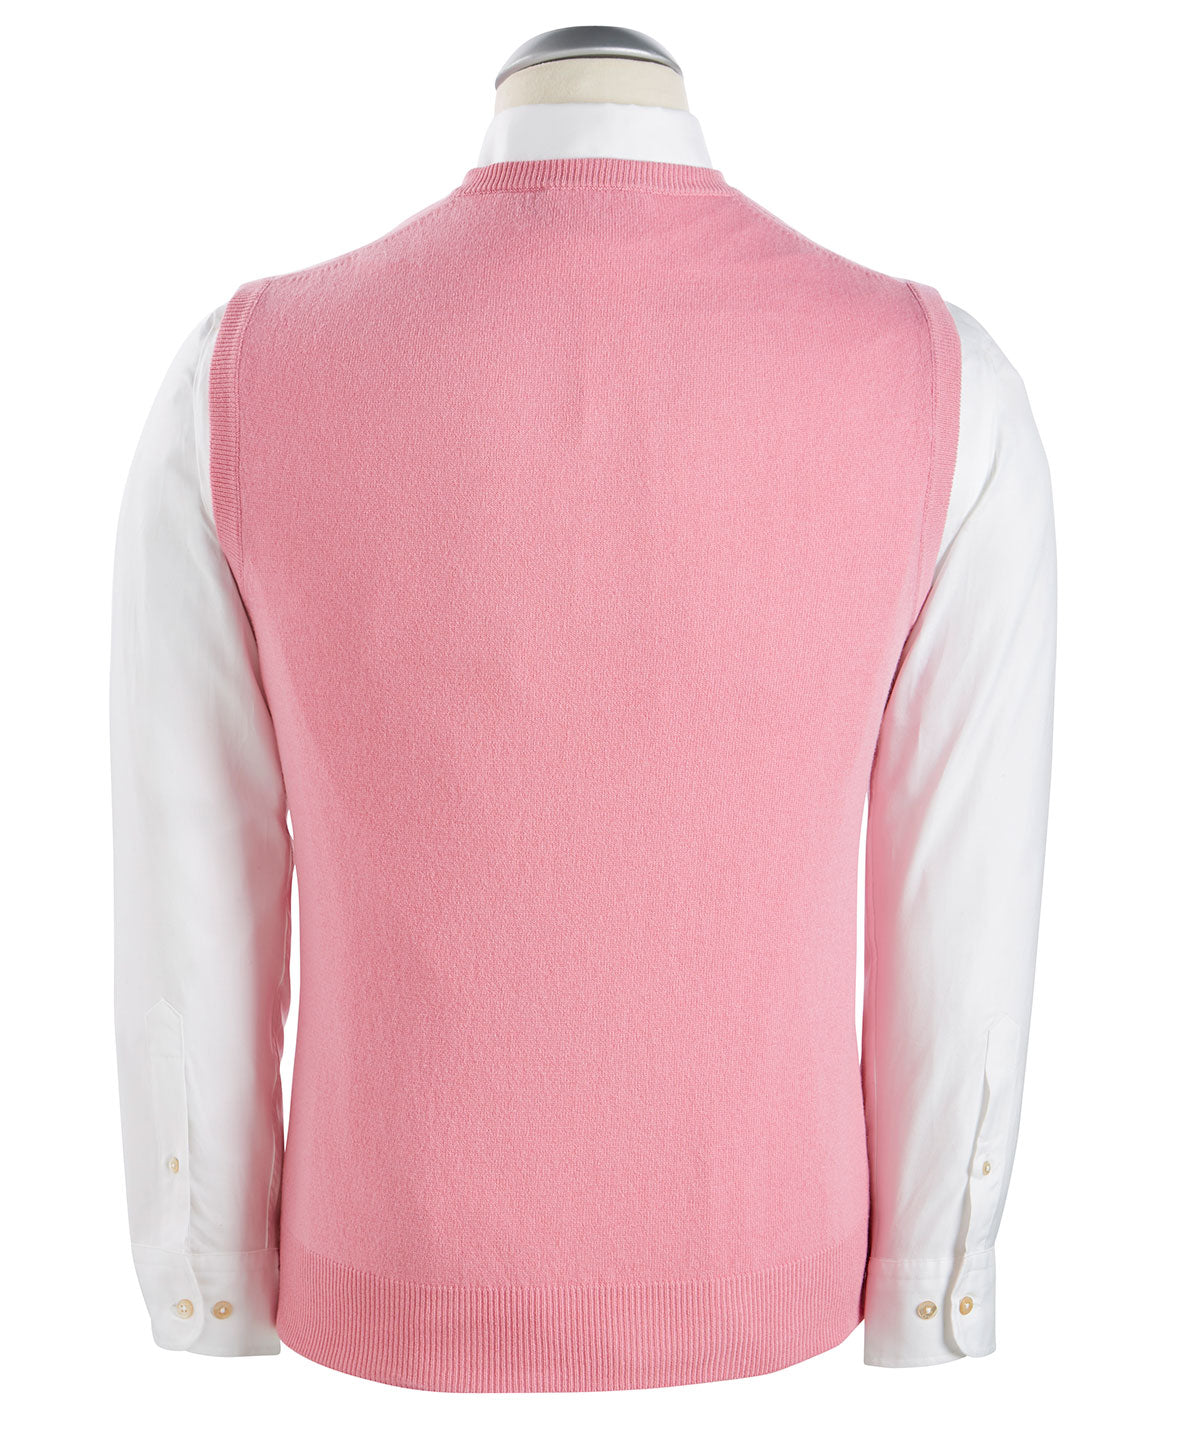 Knit Sweater Male Sleeveless Vest Men's Clothing V Neck Pink Cute Waistcoat  Baggy X 100 Pure Cashmere Cotton Old Free Shipping A